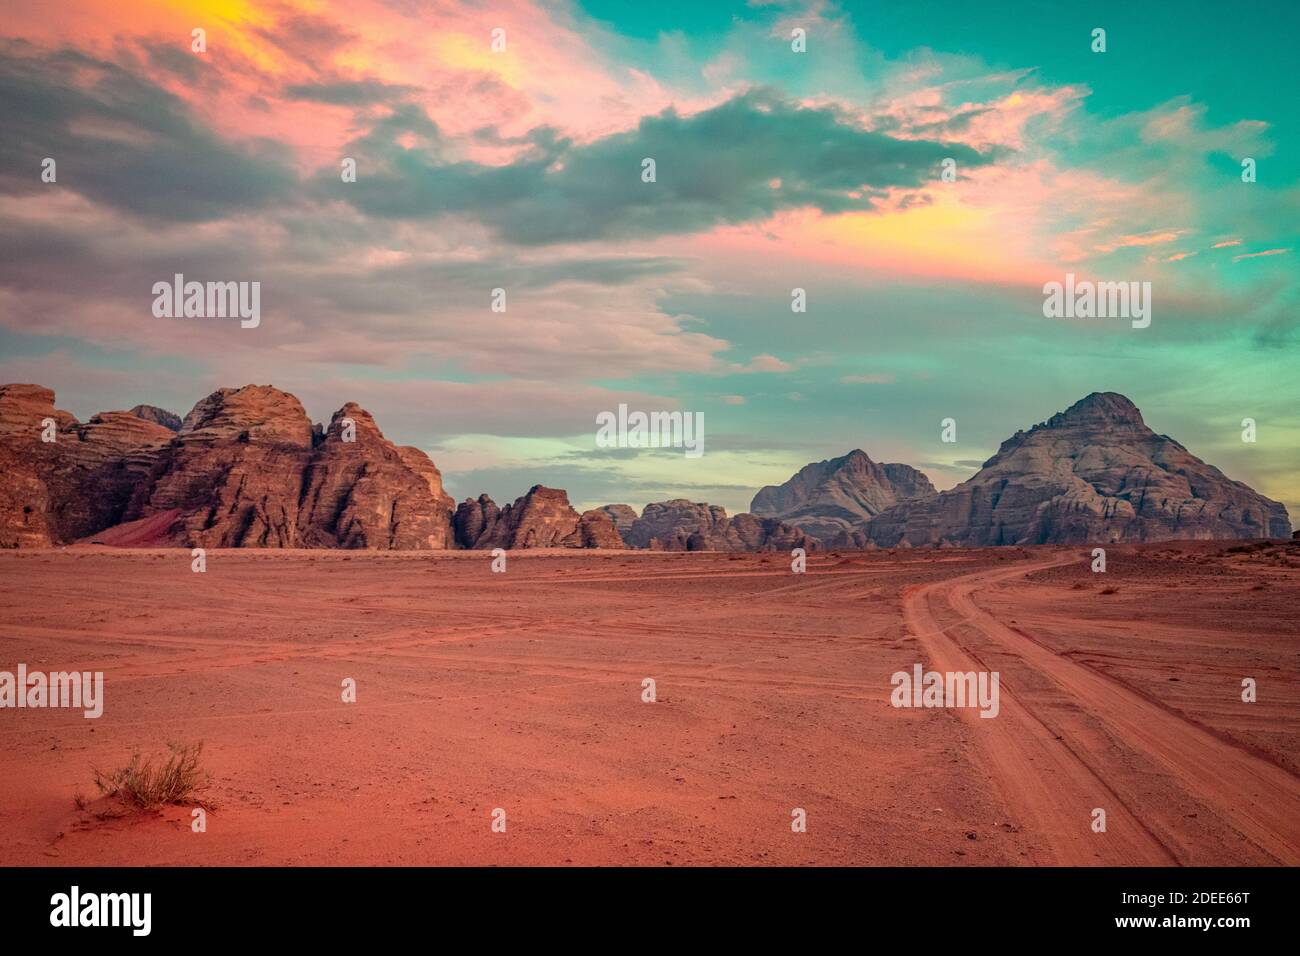 Planet Mars like landscape - Photo of Wadi Rum desert in Jordan with red pink sky above, this location was used as set for many science fiction movies Stock Photo